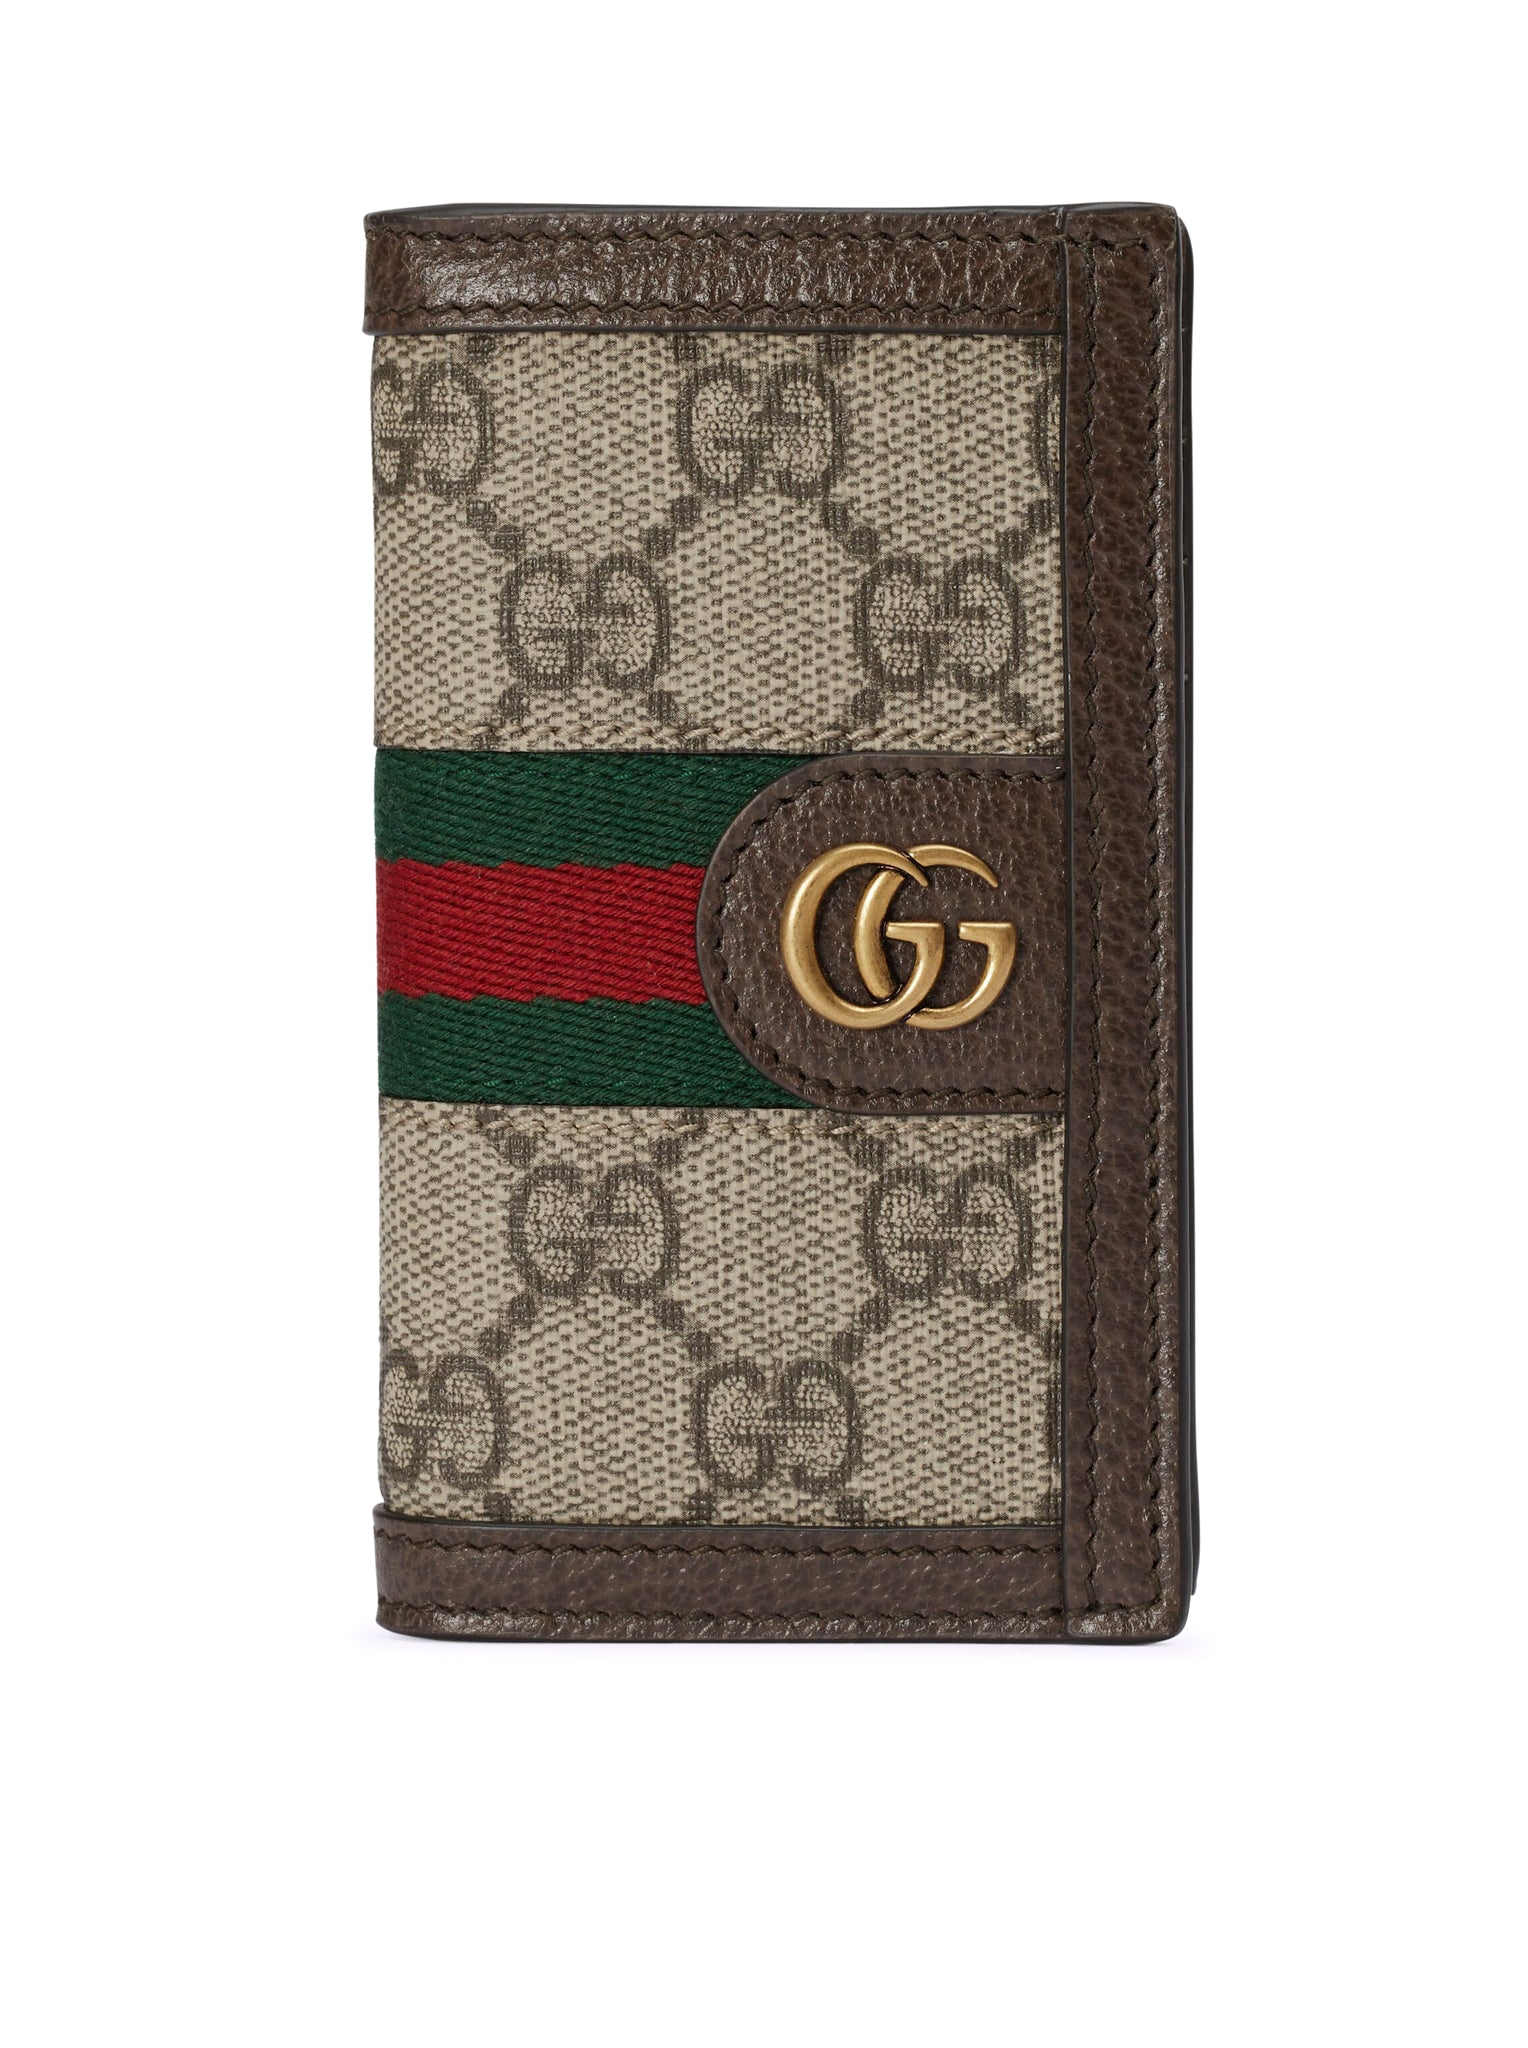 Ophidia long wallet in GG Supreme